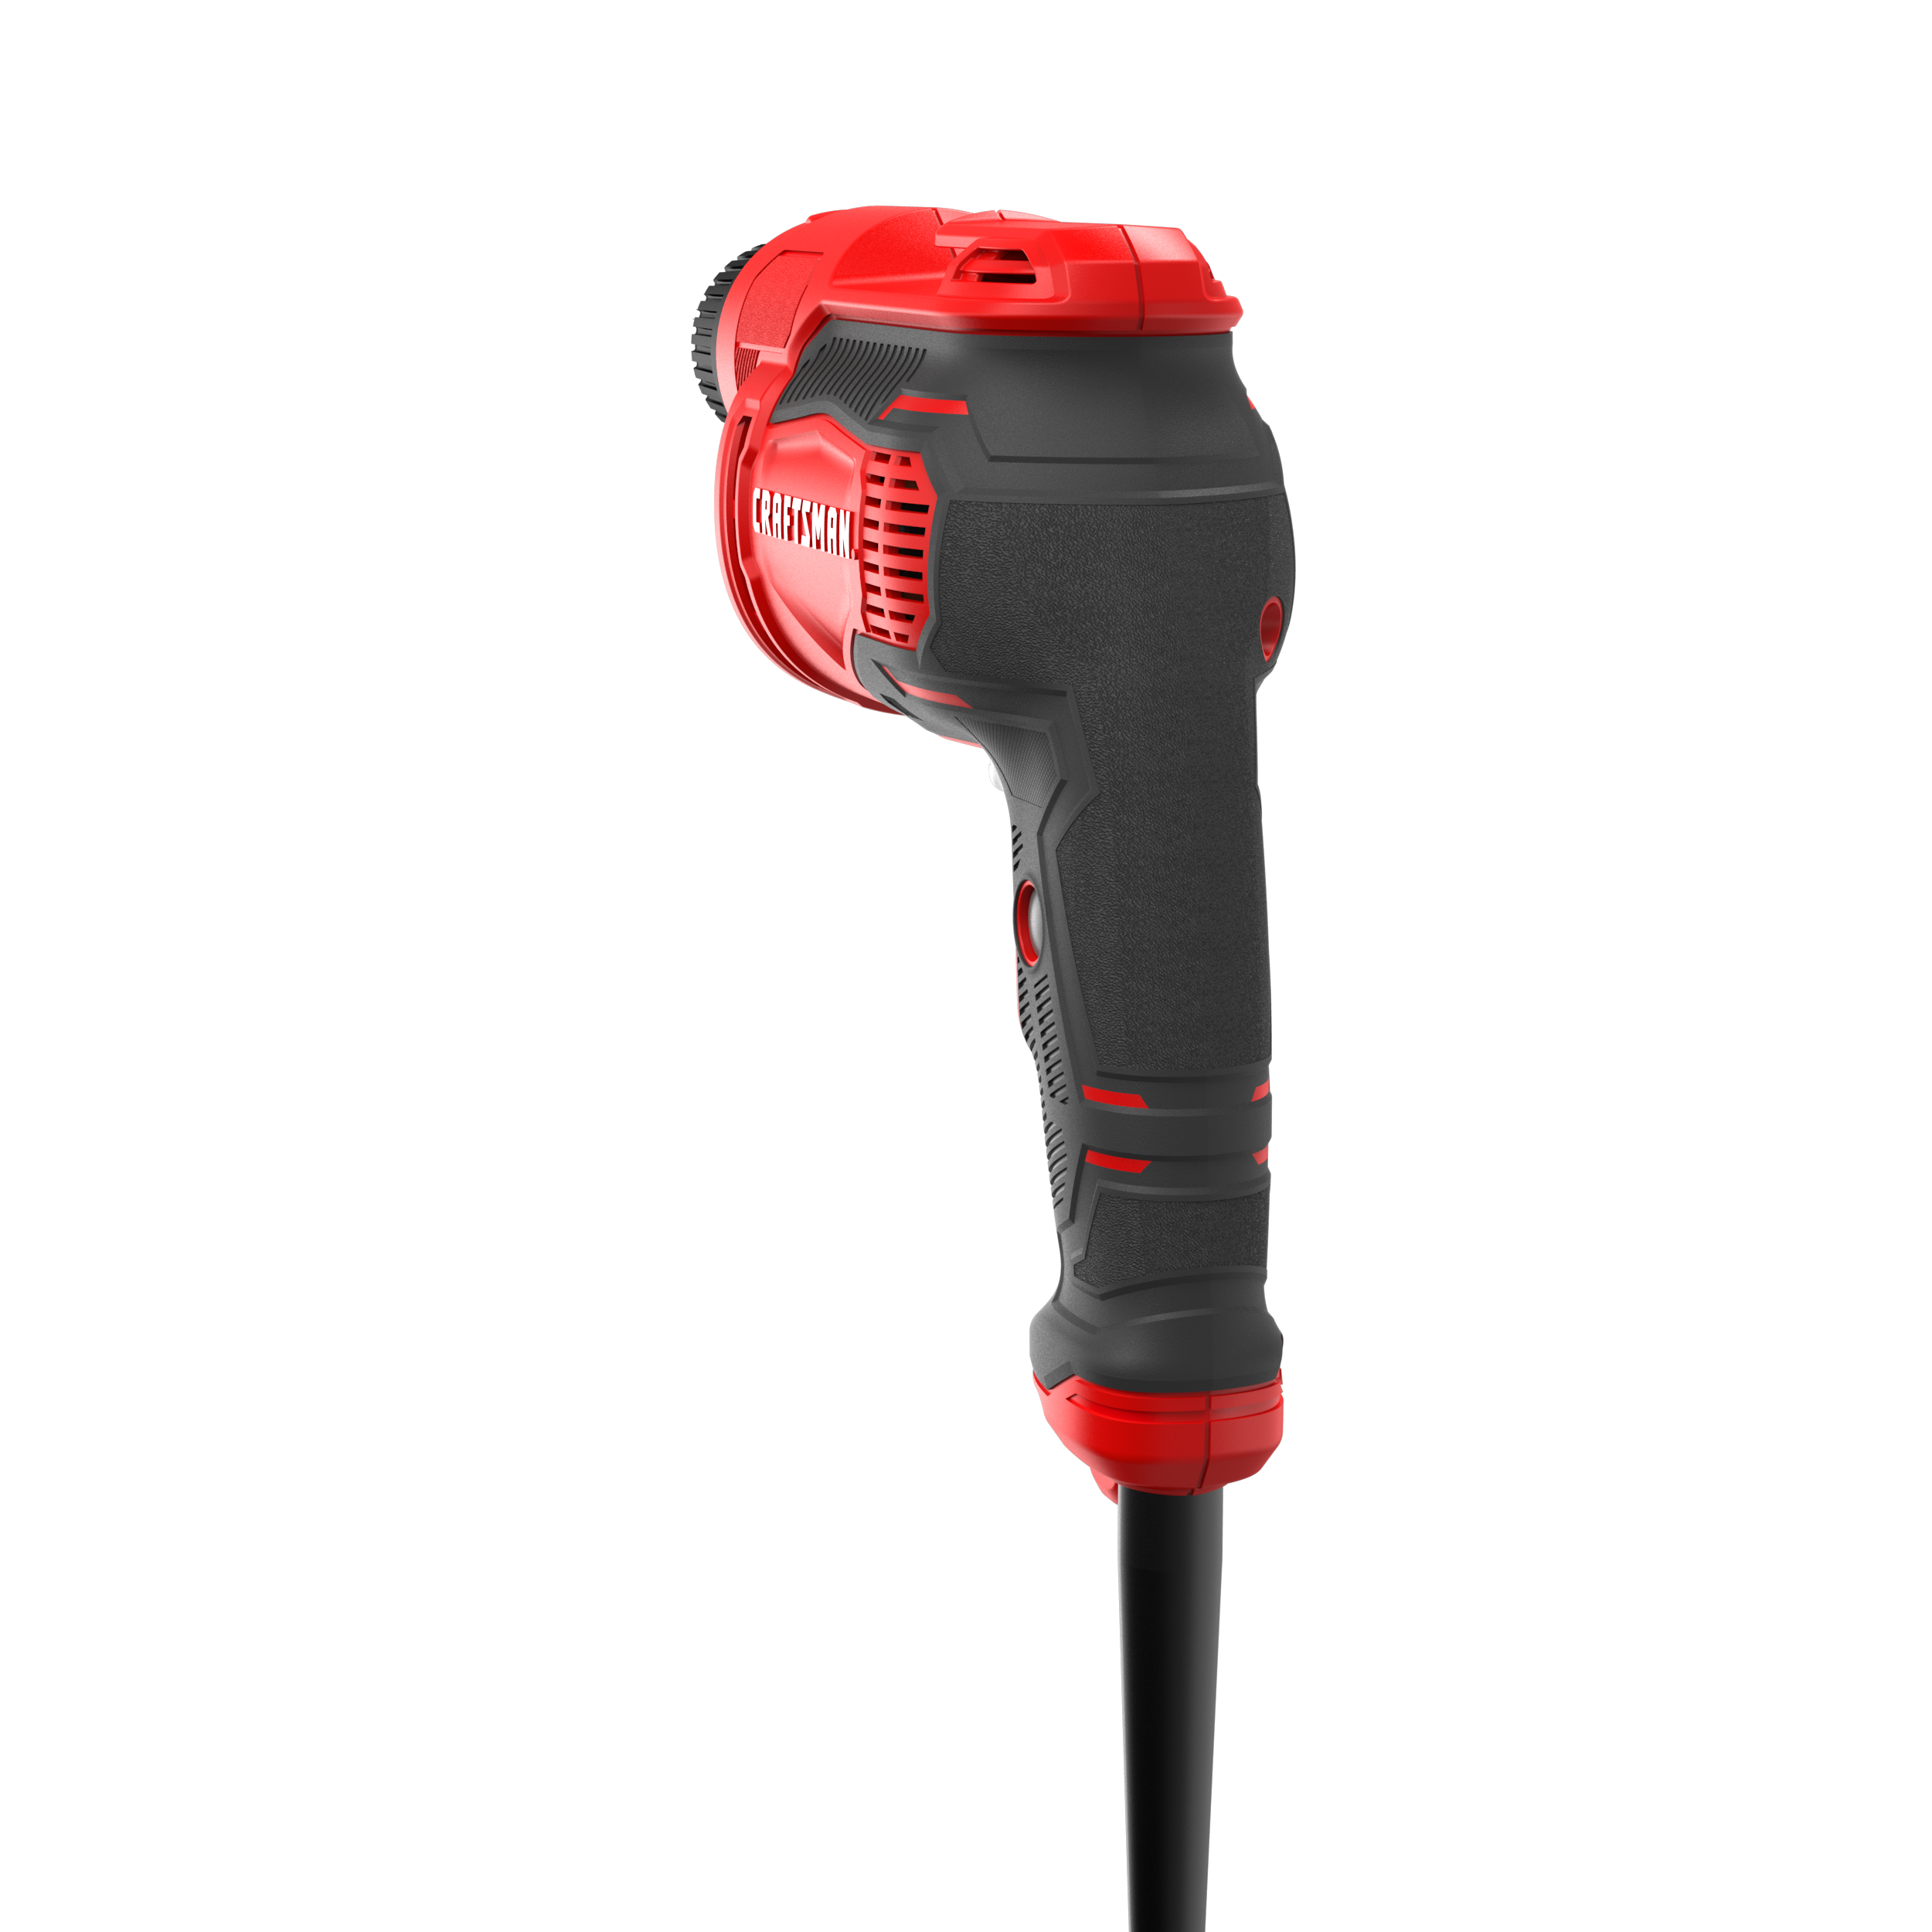 3/8-in Electric Drill/Driver (7 Amp) | CRAFTSMAN